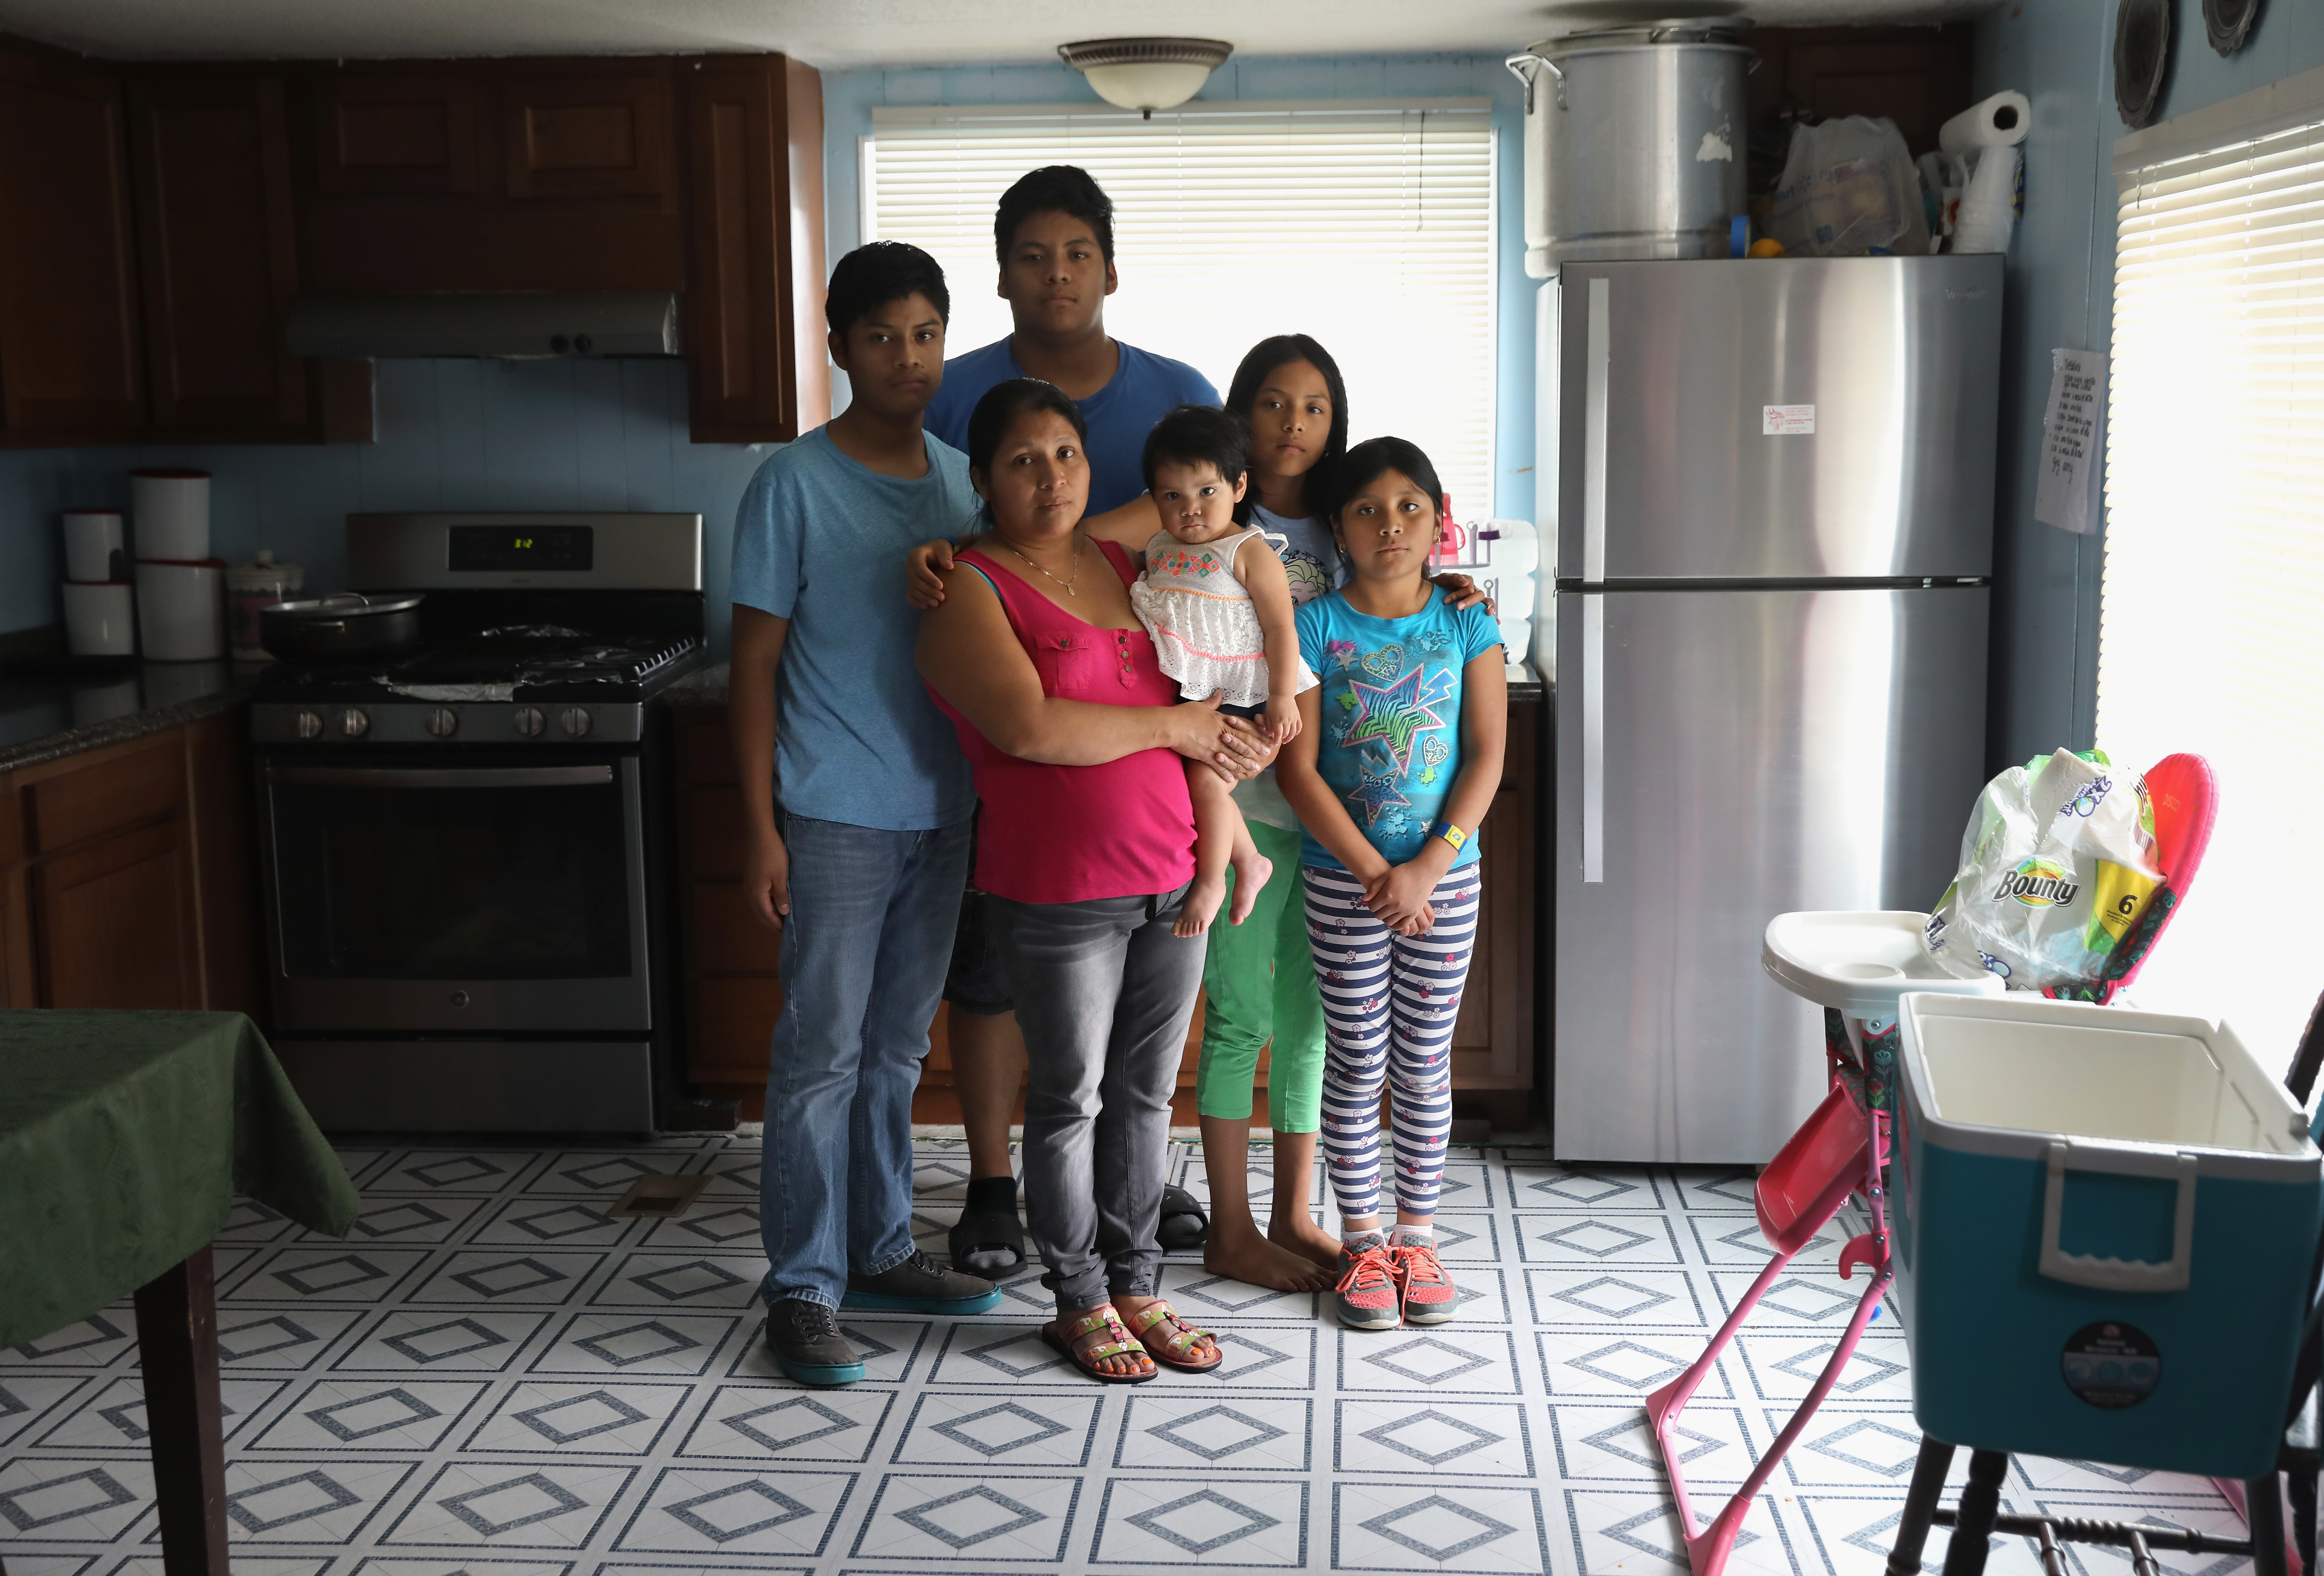 Guadalupe Lopez (center), an undocumented immigrant from Mexico, and her five U.S.-born children.